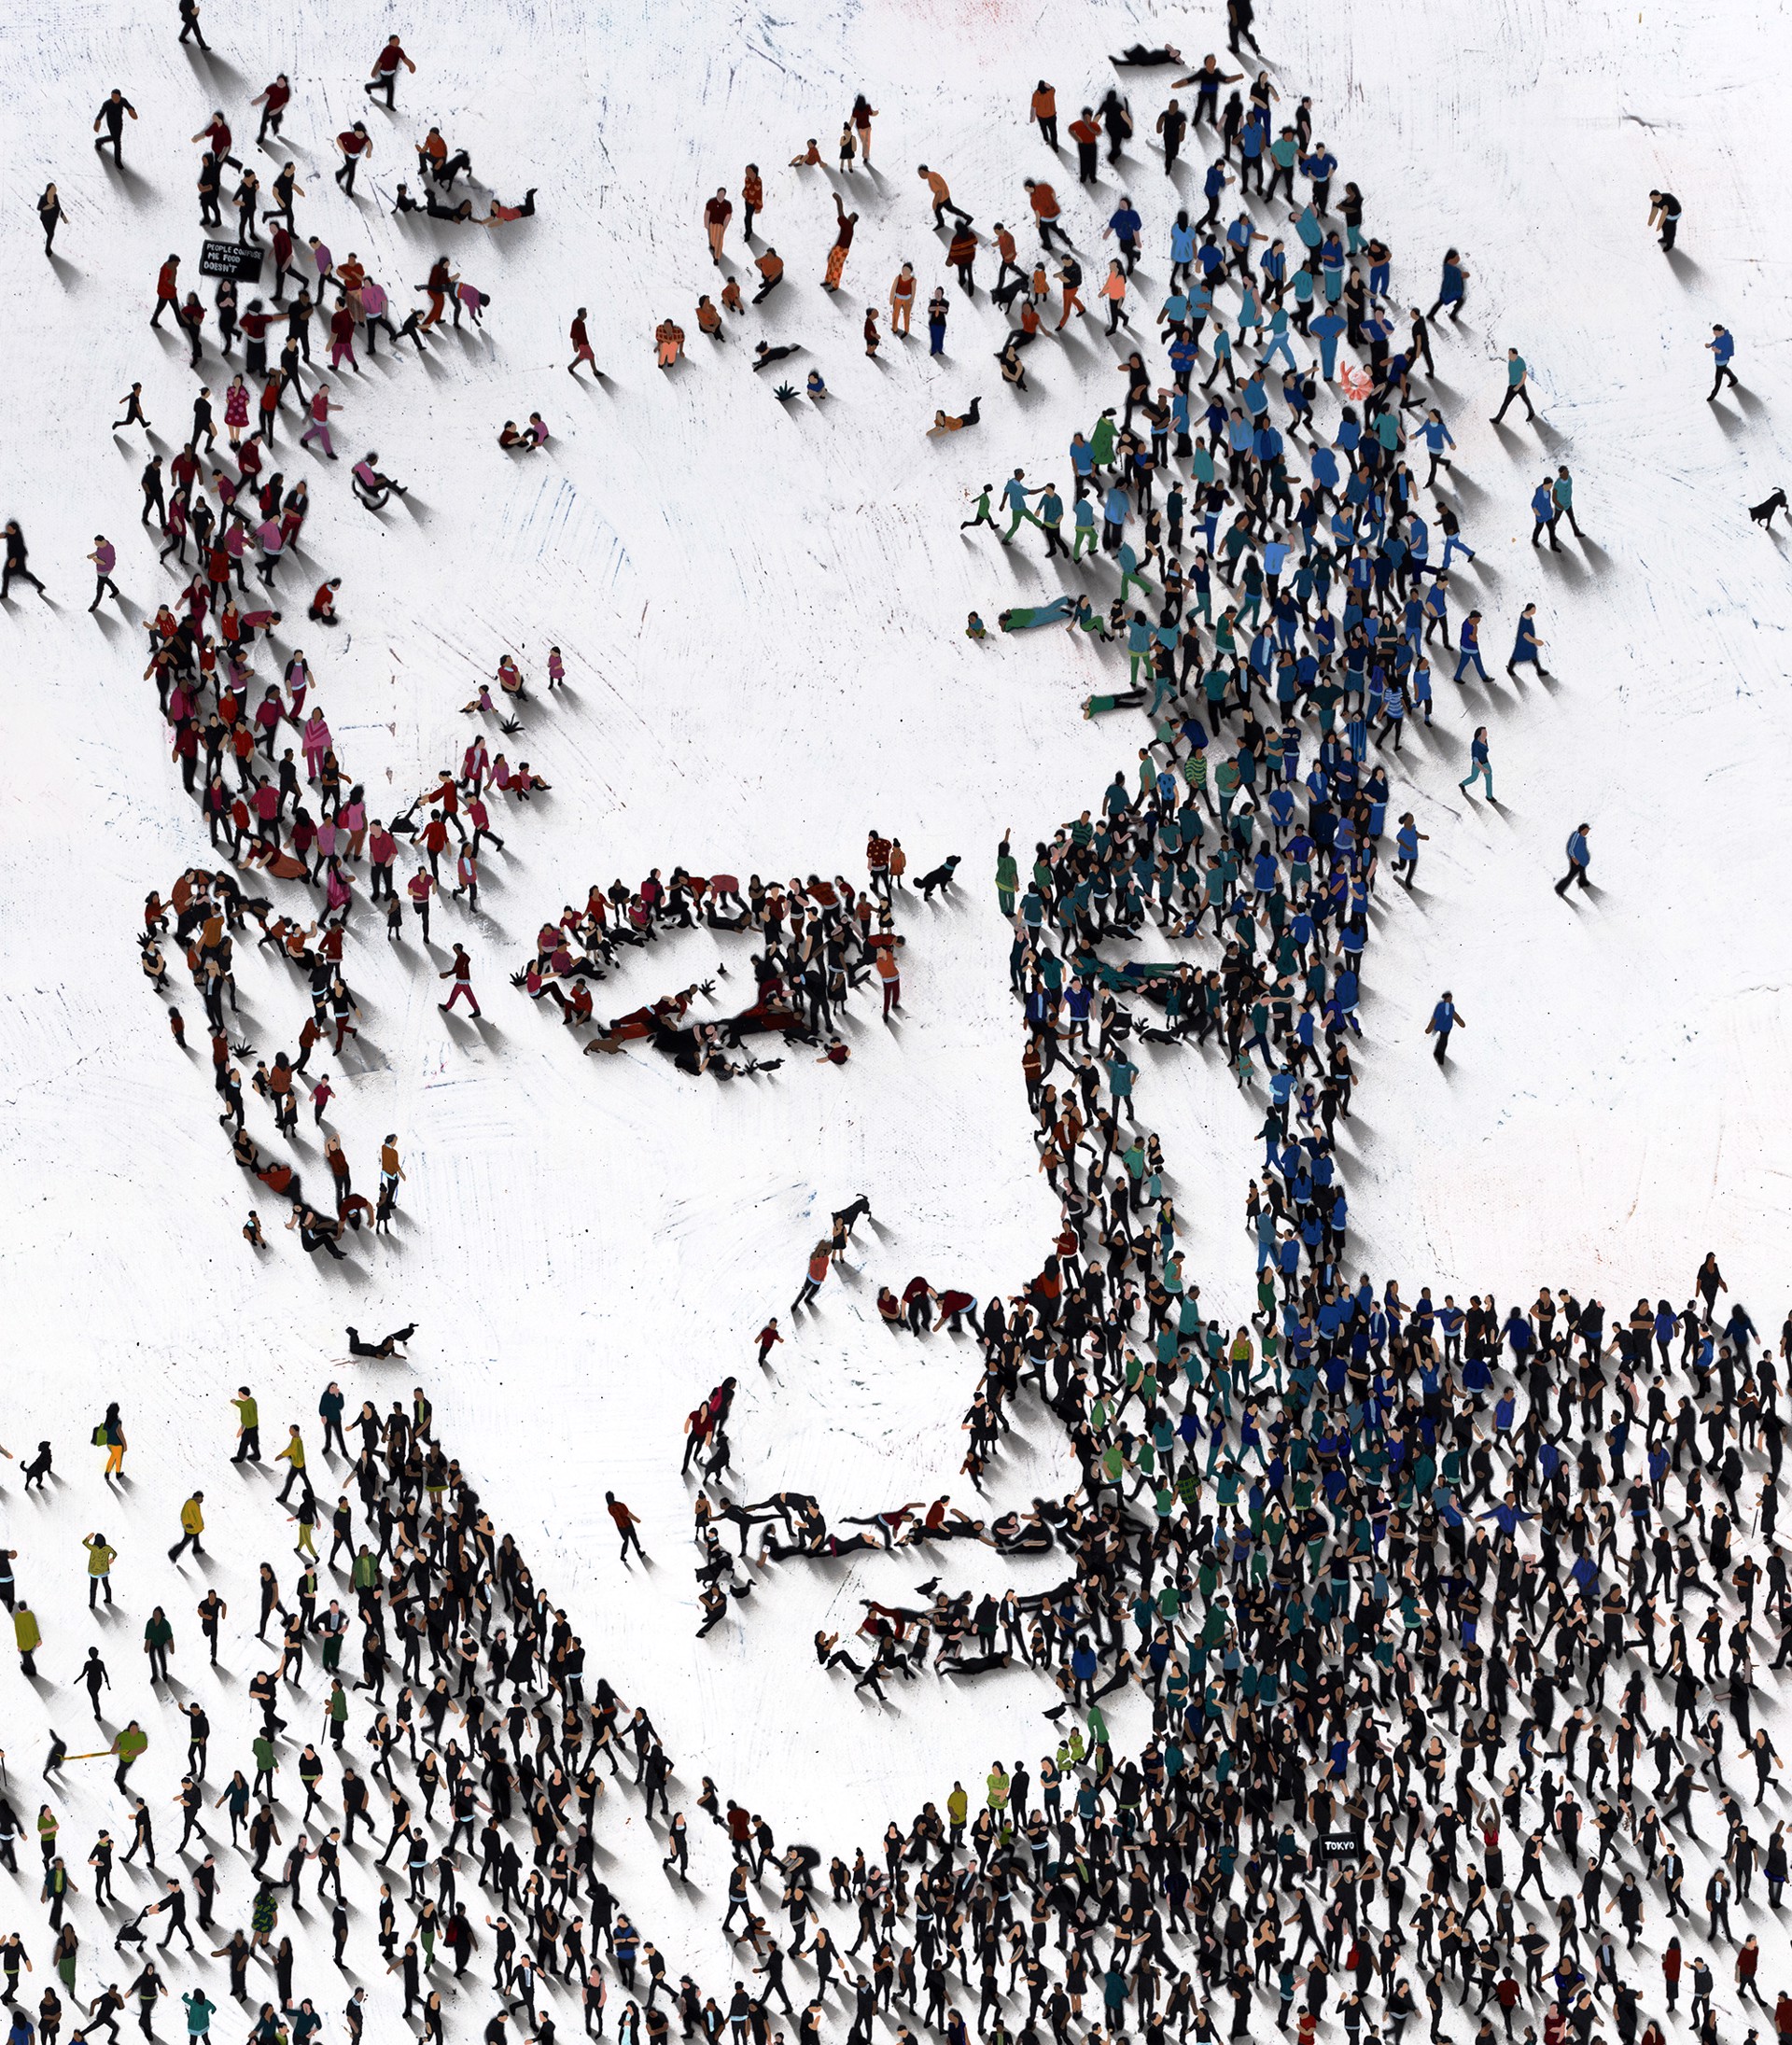 Anthony Bourdain by Craig Alan, Populus Commission